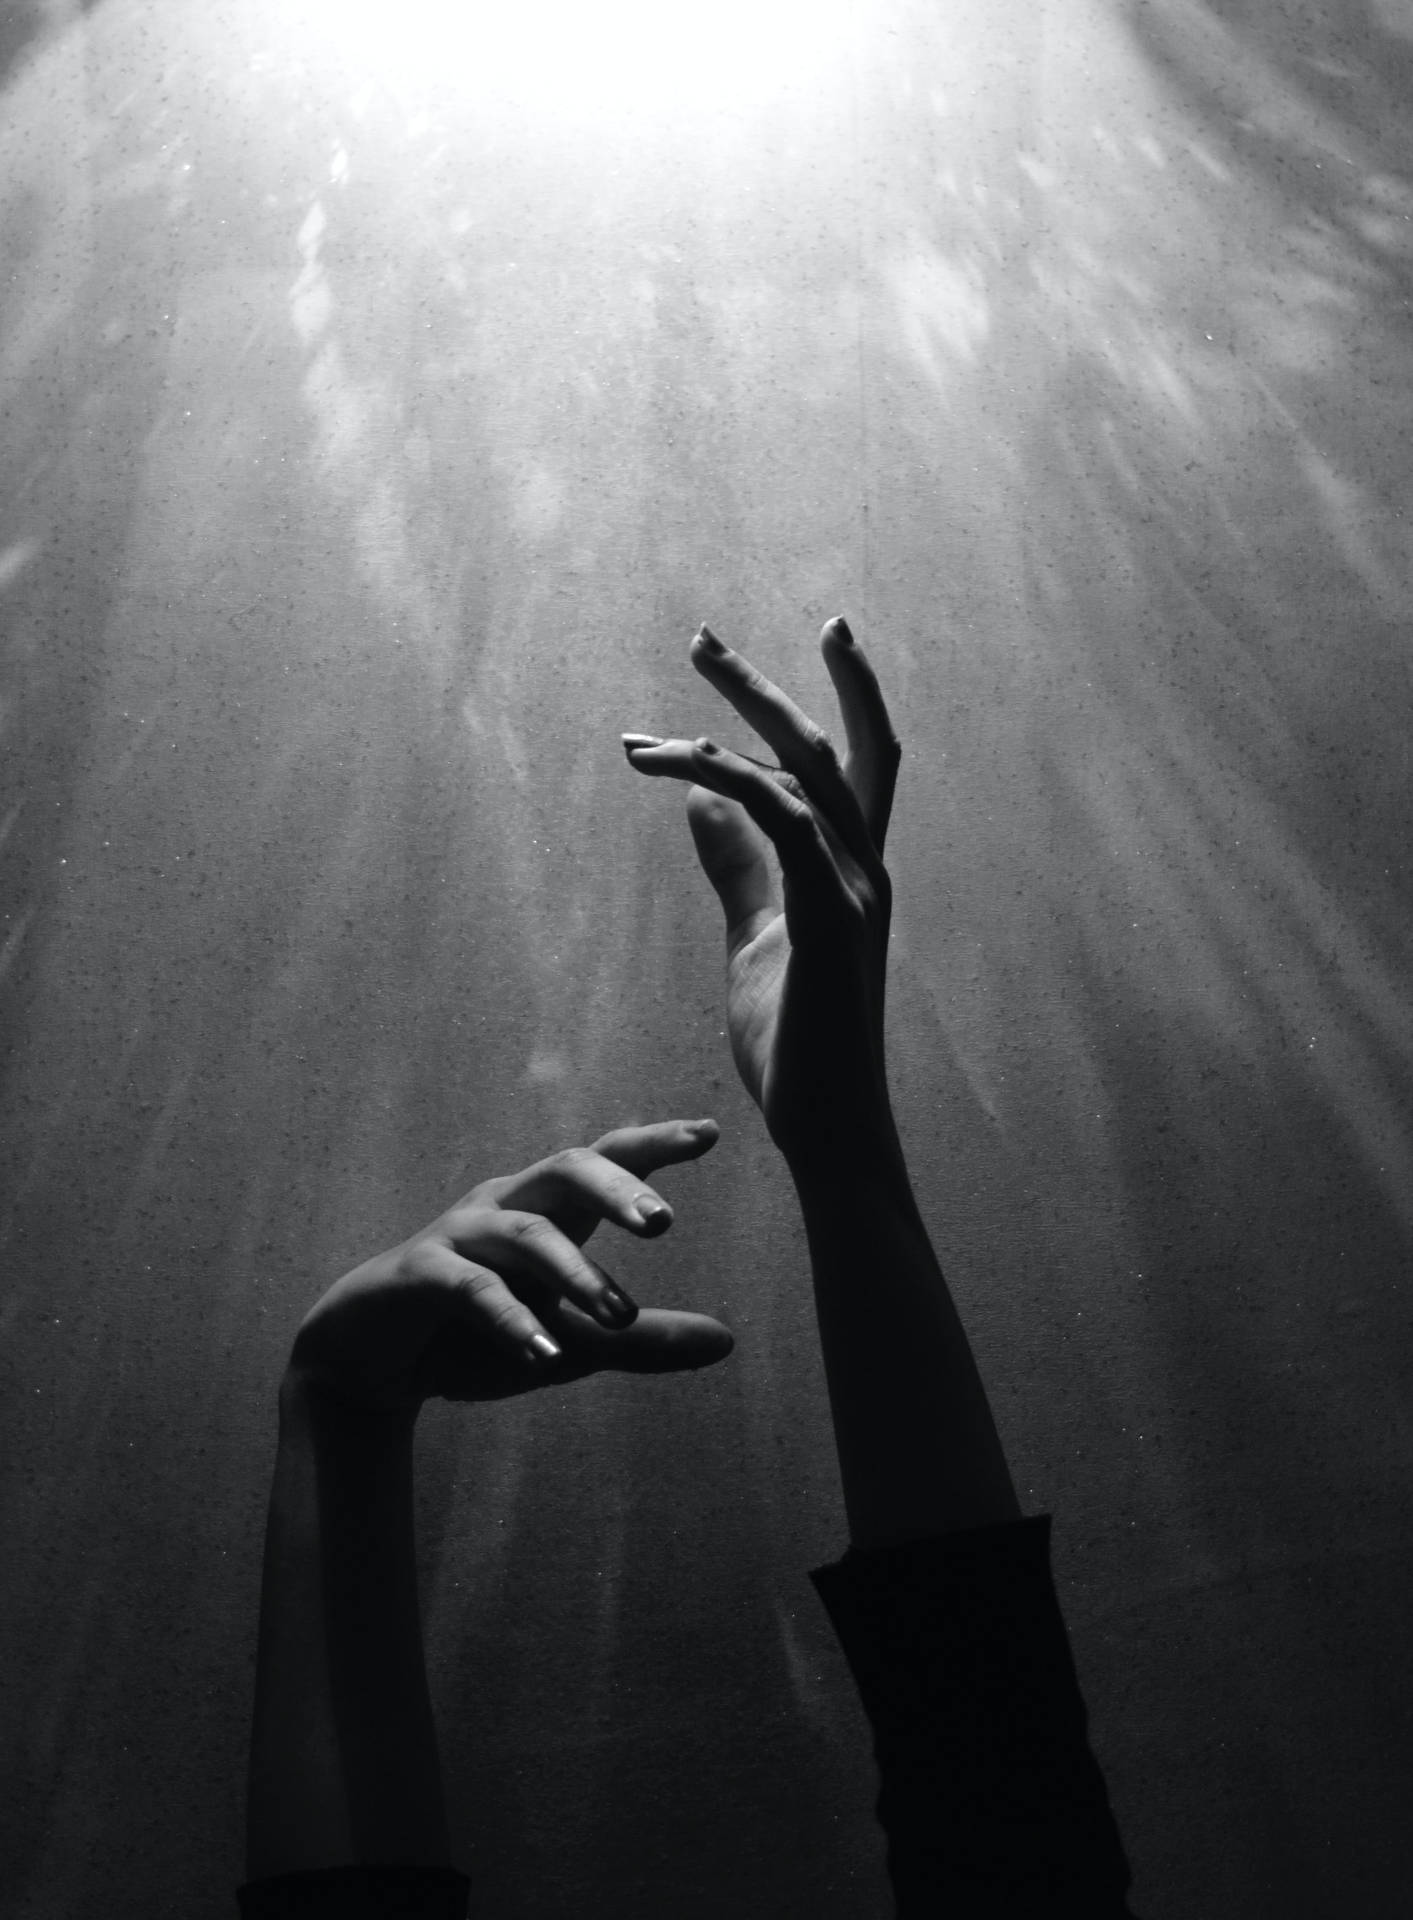 Black And White Portrait Of Hands Reaching For The Light Wallpaper